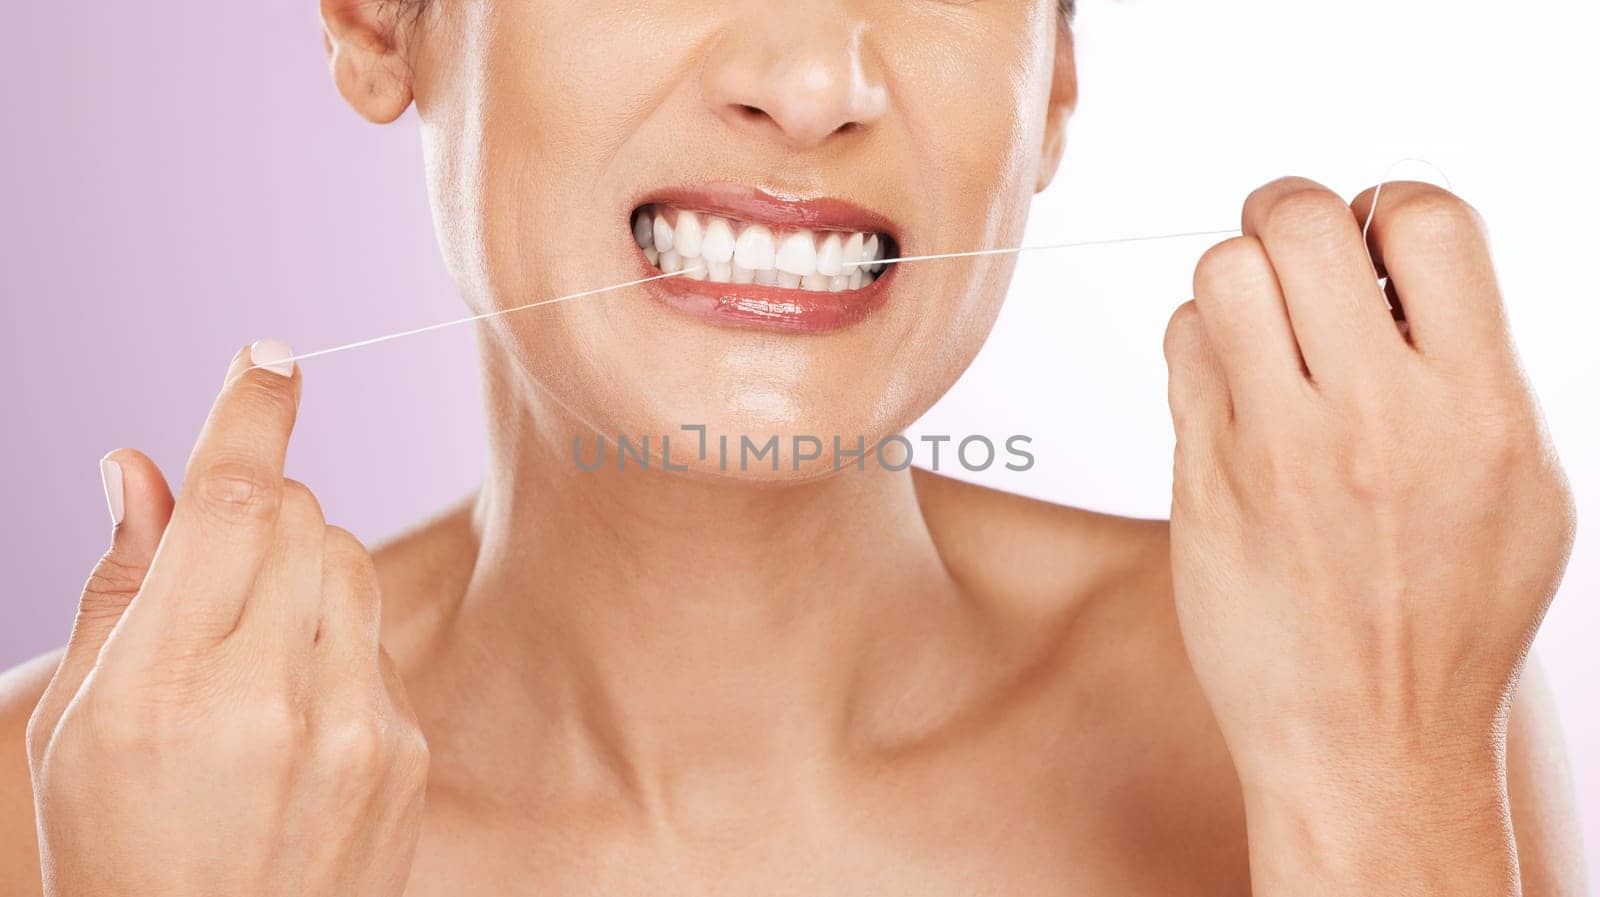 Face, woman and flossing teeth for cleaning, hygiene or tooth care in studio isolated on a purple background. Oral health, fresh breath or mature female model with dental floss or thread for wellness by YuriArcurs